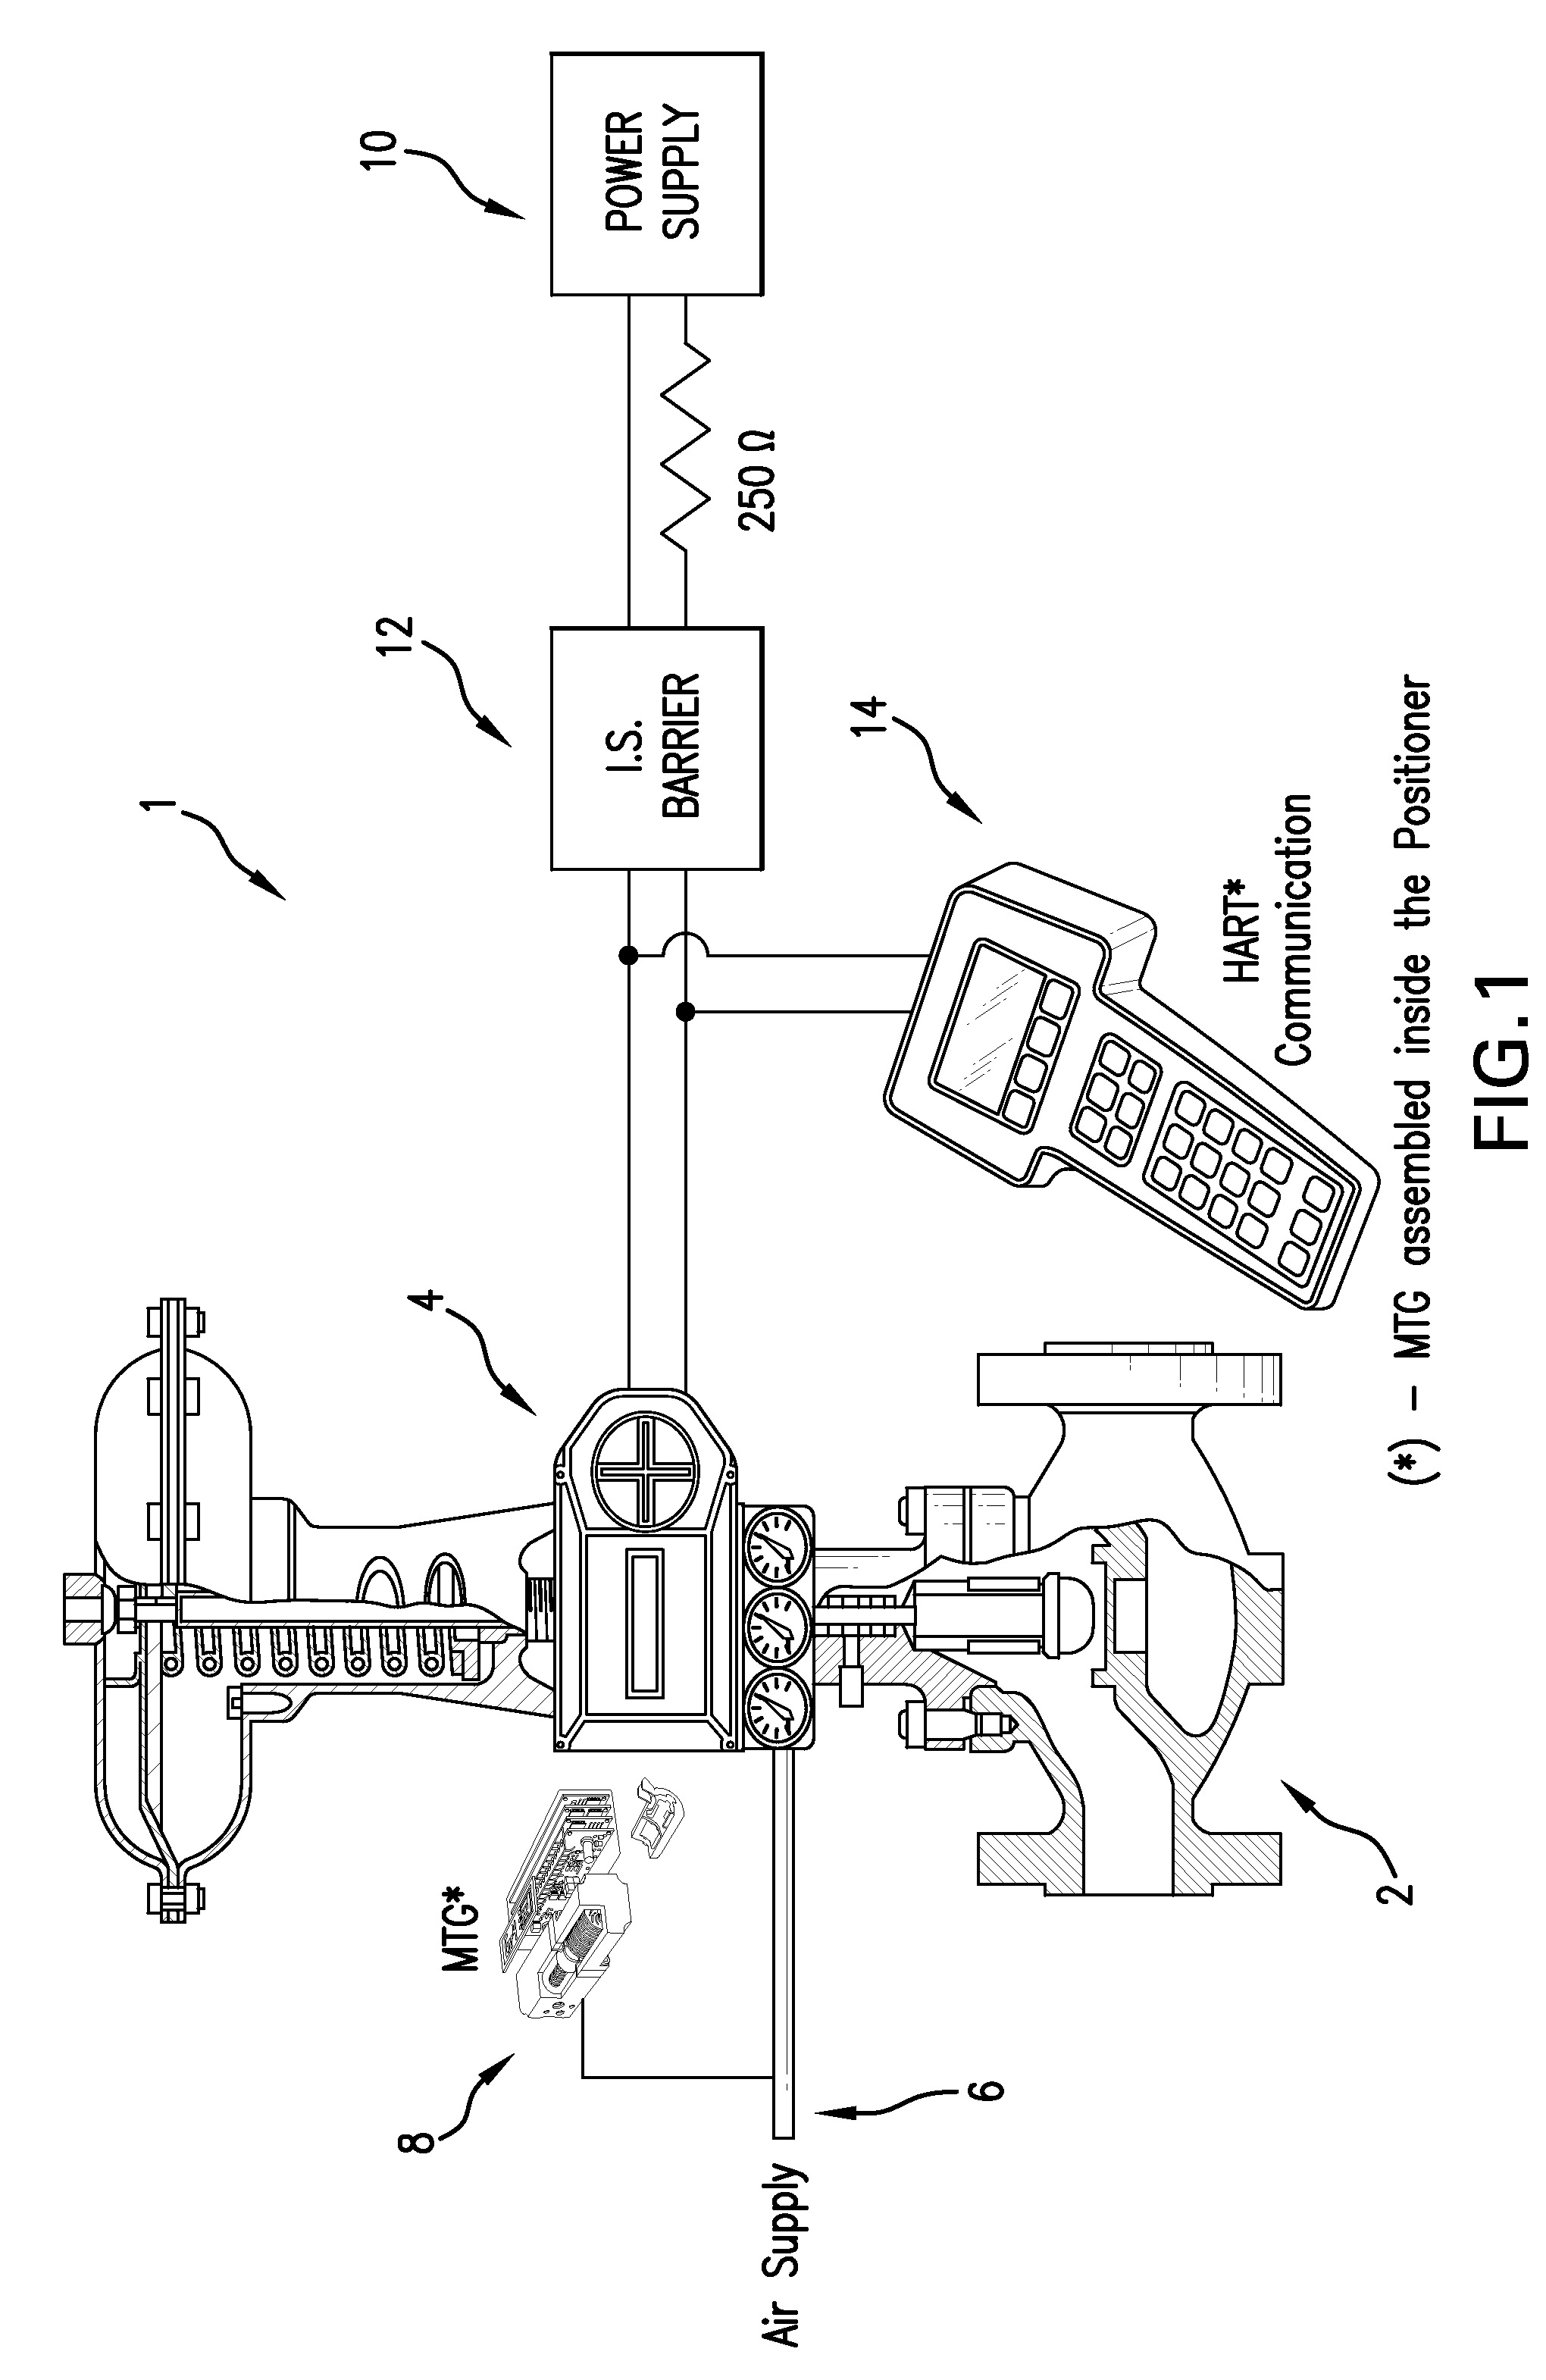 Micro-power generator for valve control applications